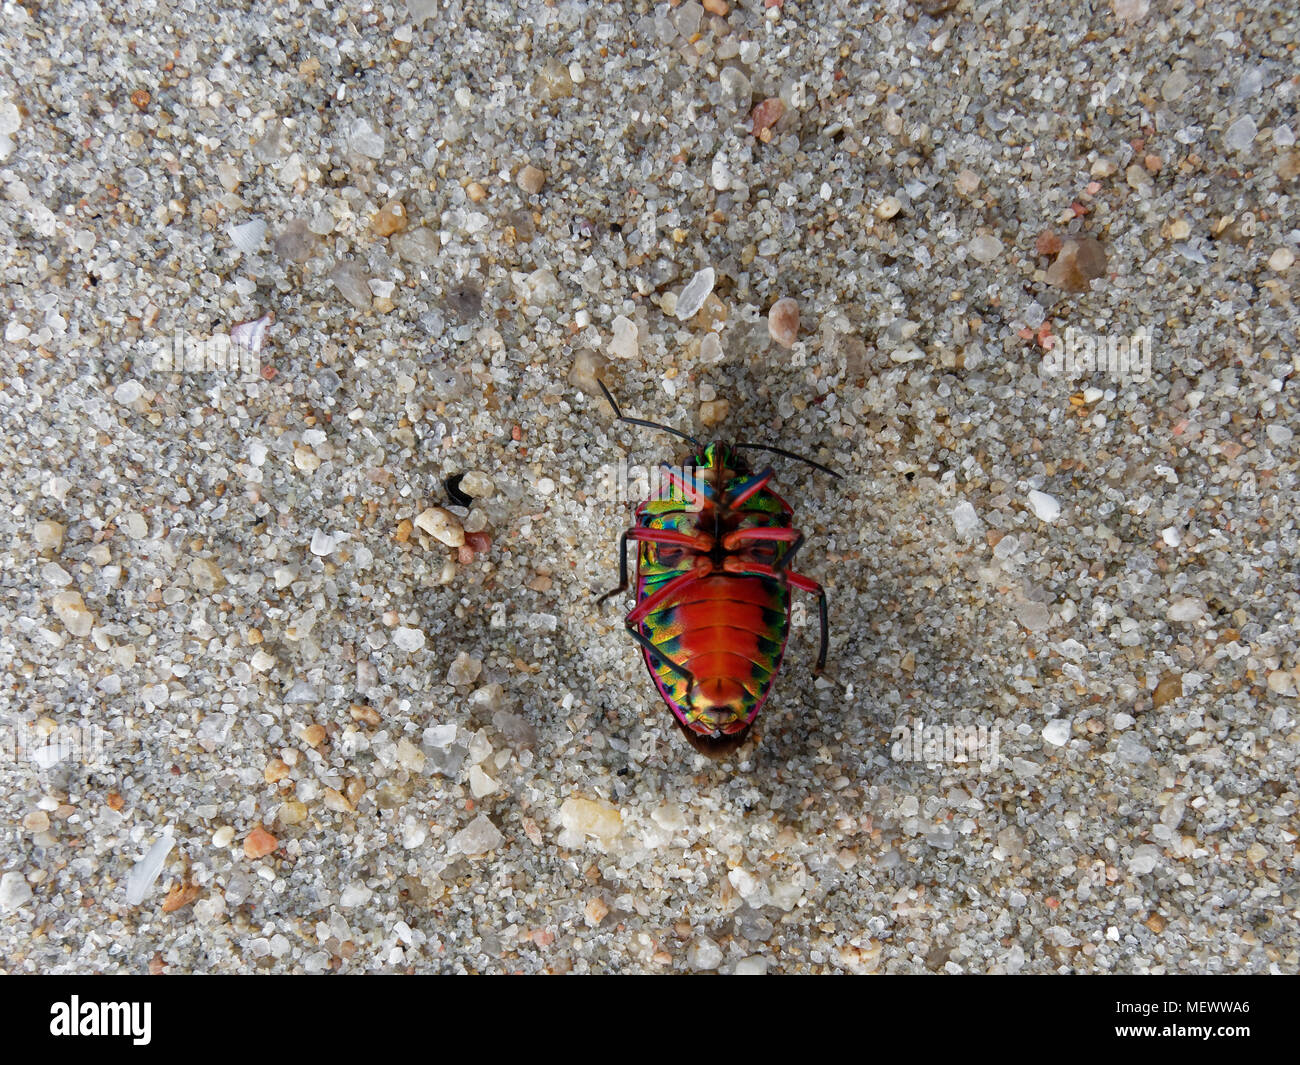 Upside down rainbow shield bug rolls onto its back over sand on beach background, which is sign that the bug is going to die Stock Photo